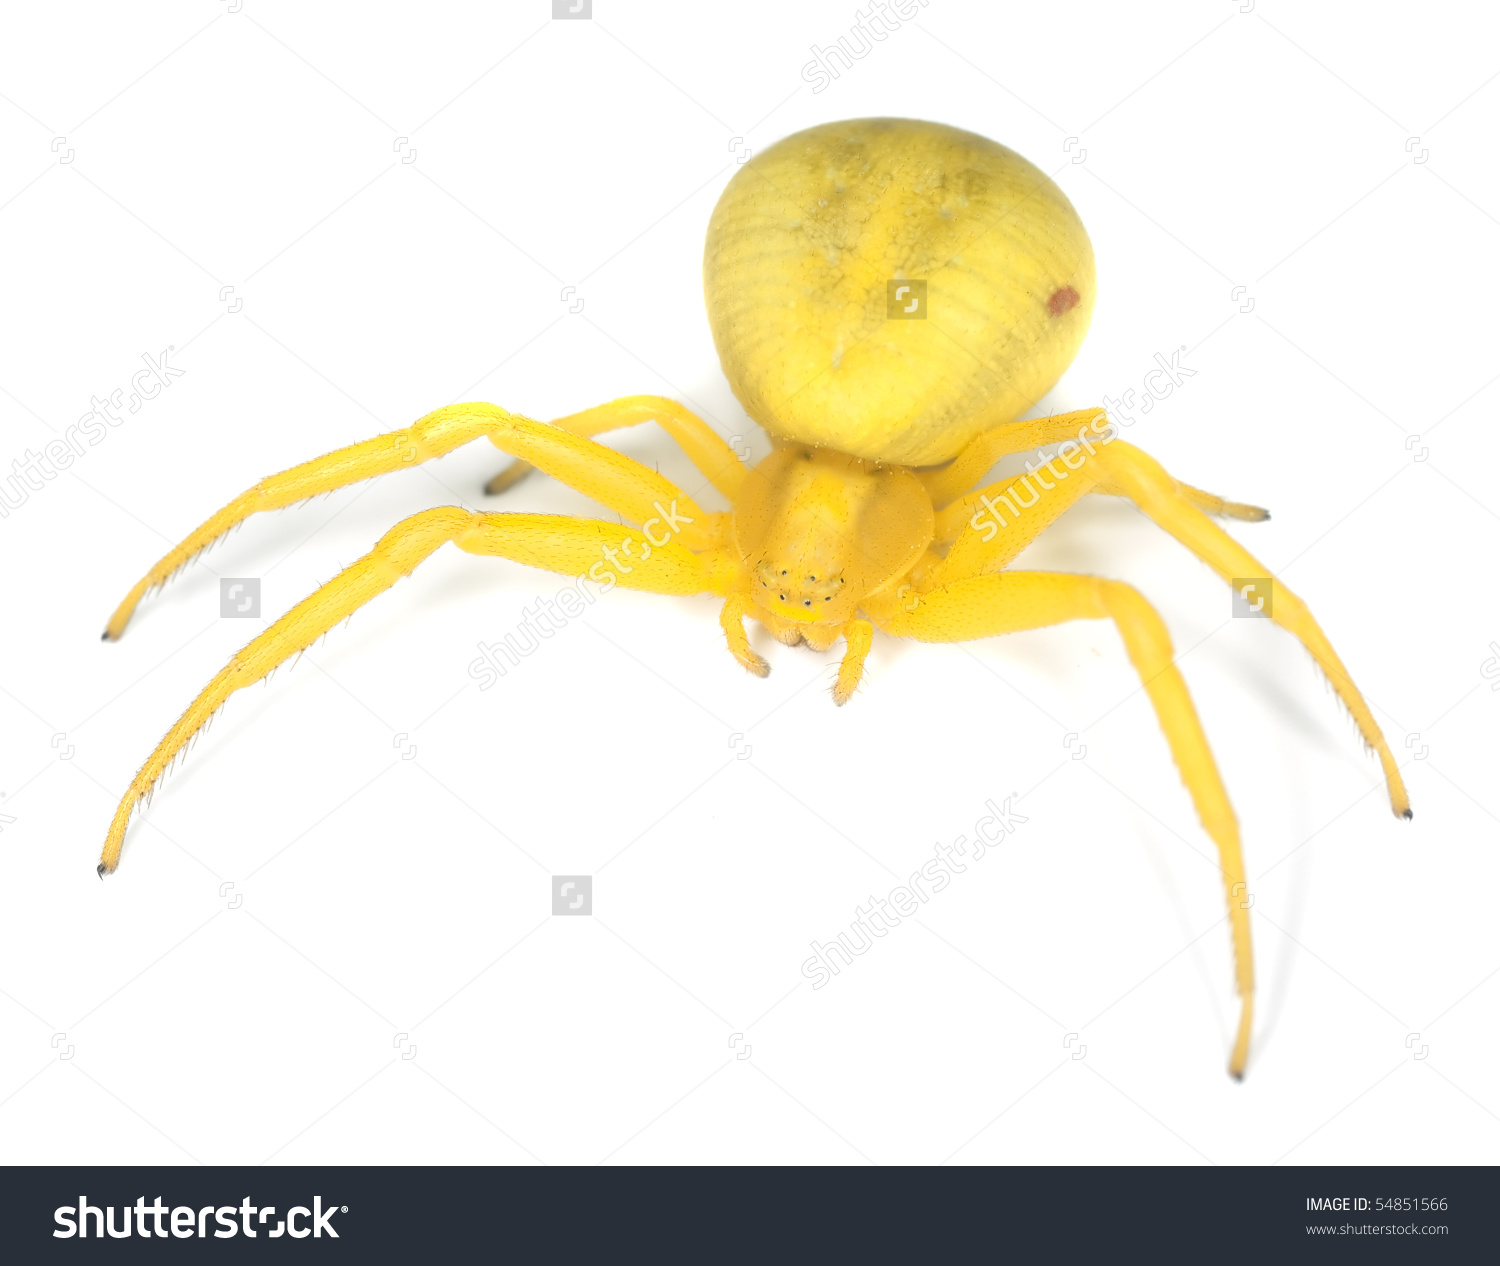 Crab Spider clipart #11, Download drawings